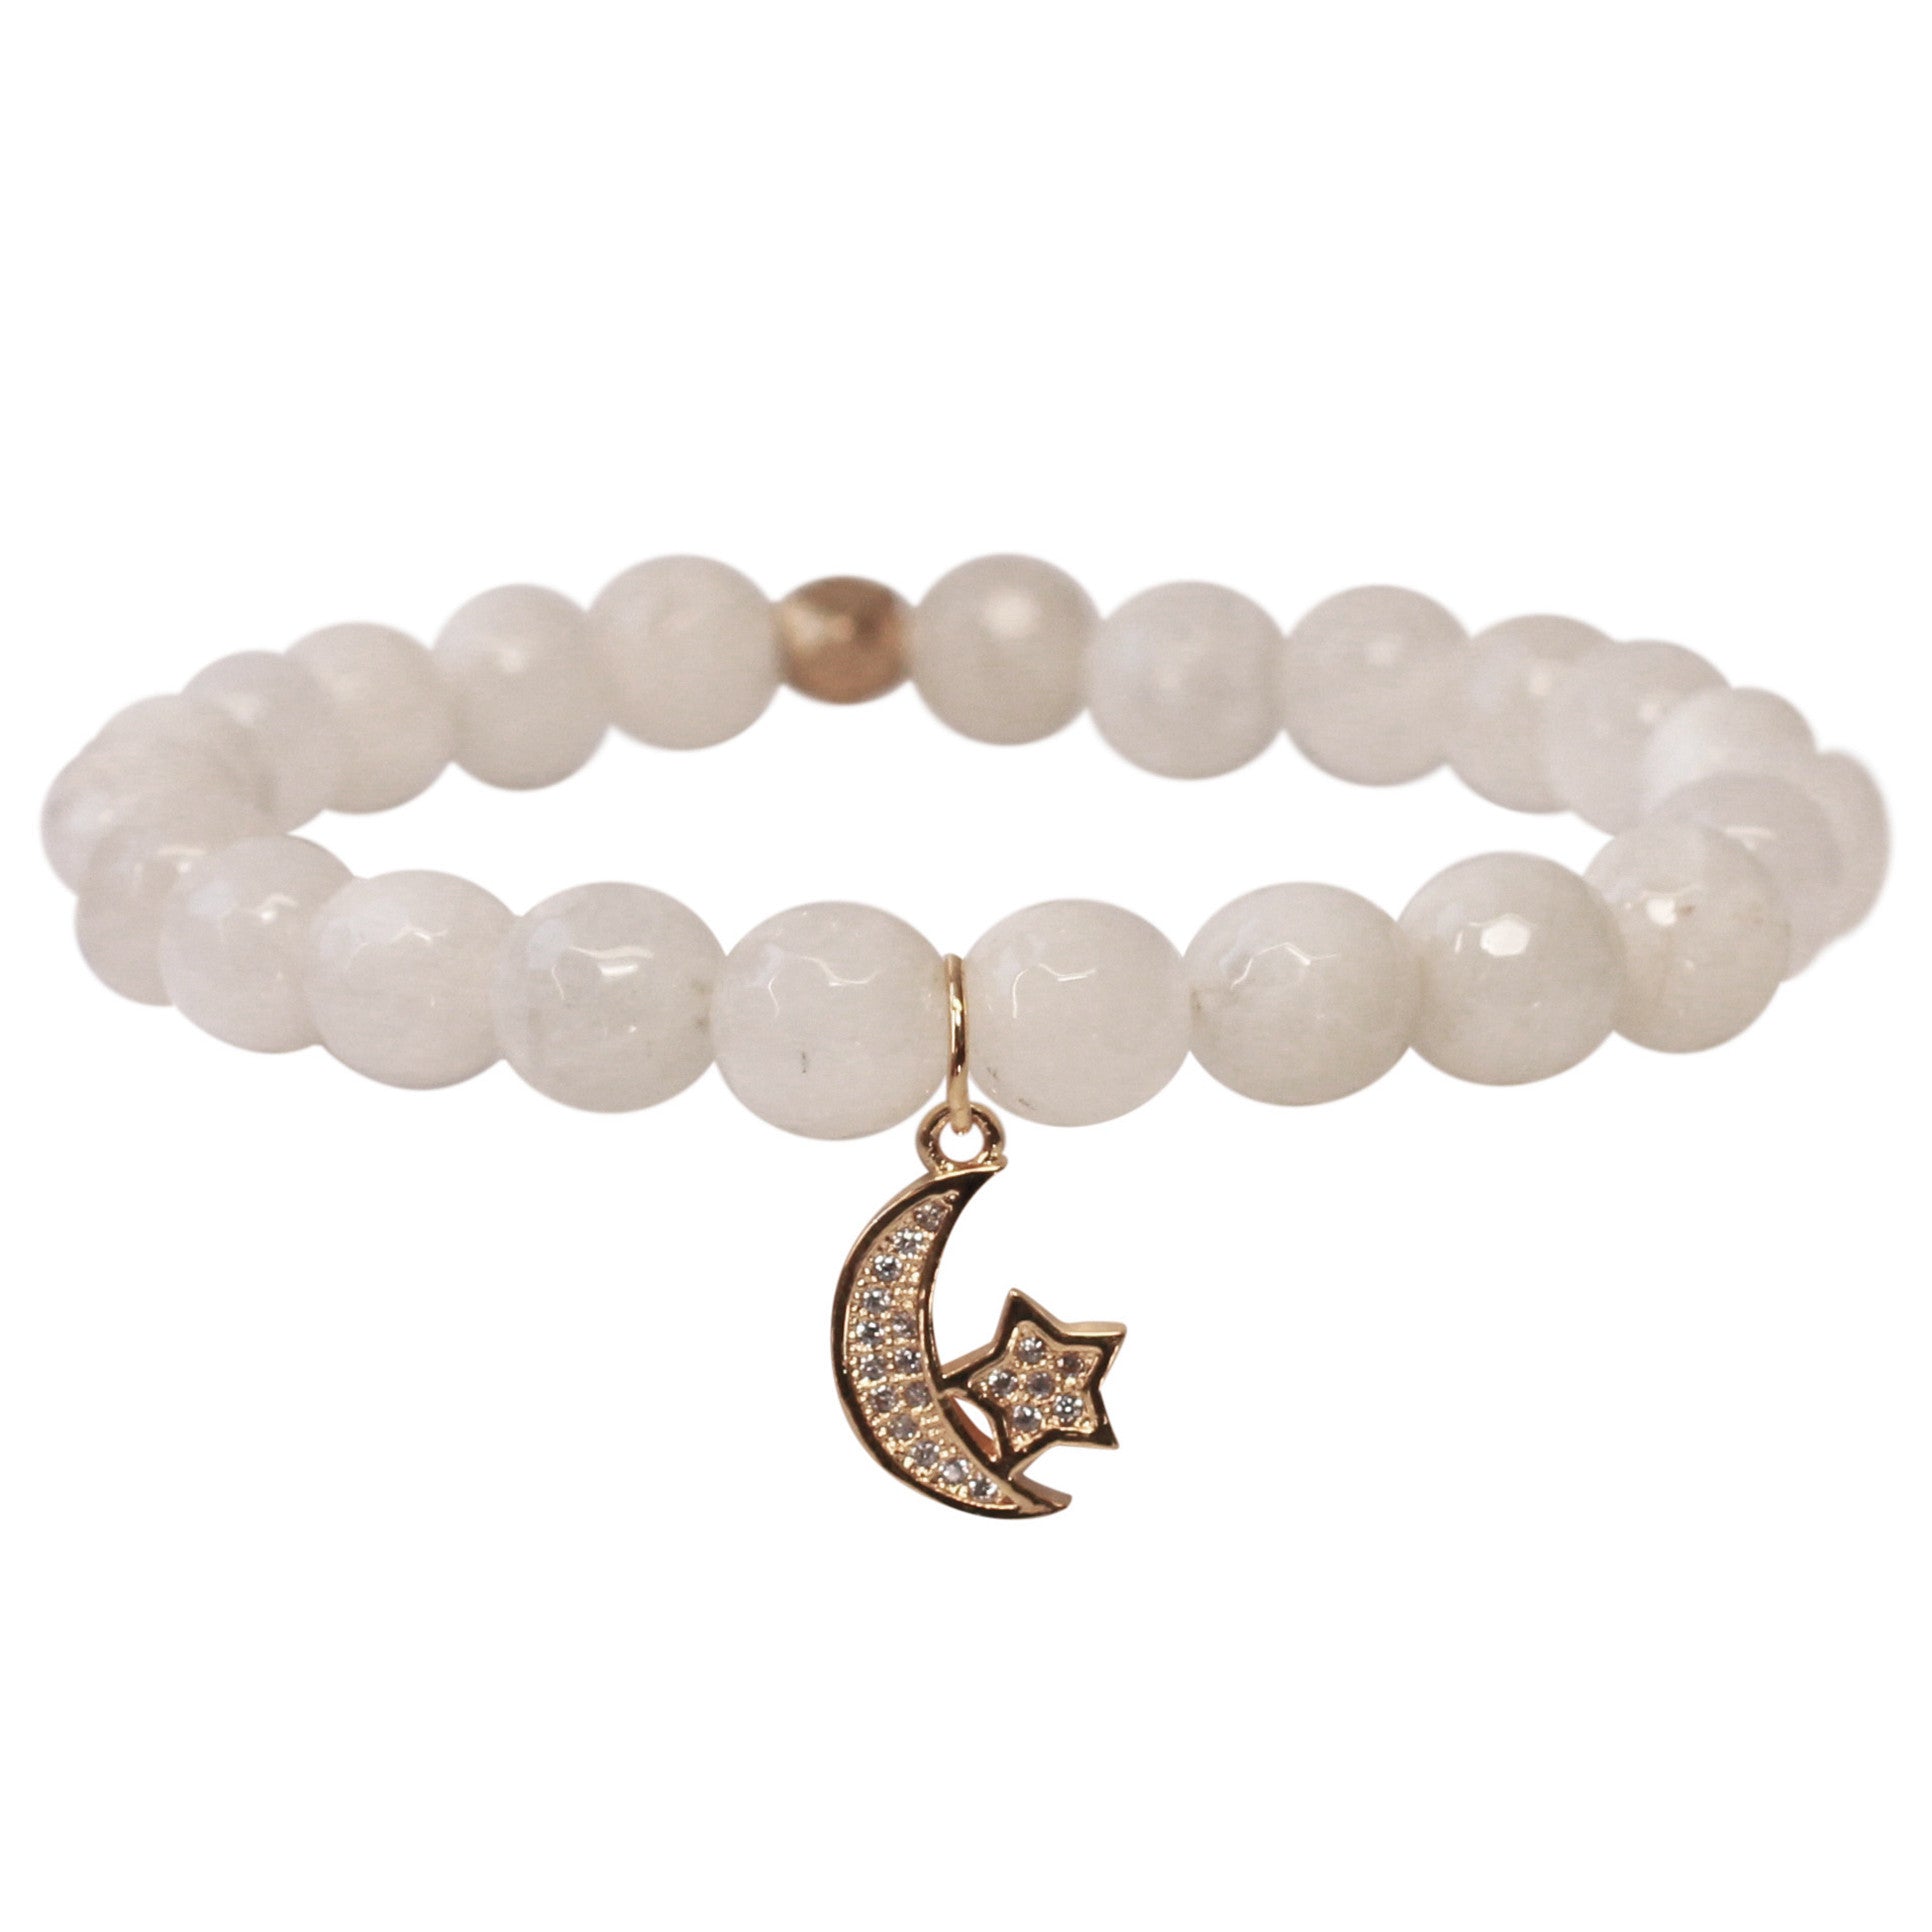 The Moon & Stars Charm in White Bead with Gold Charm